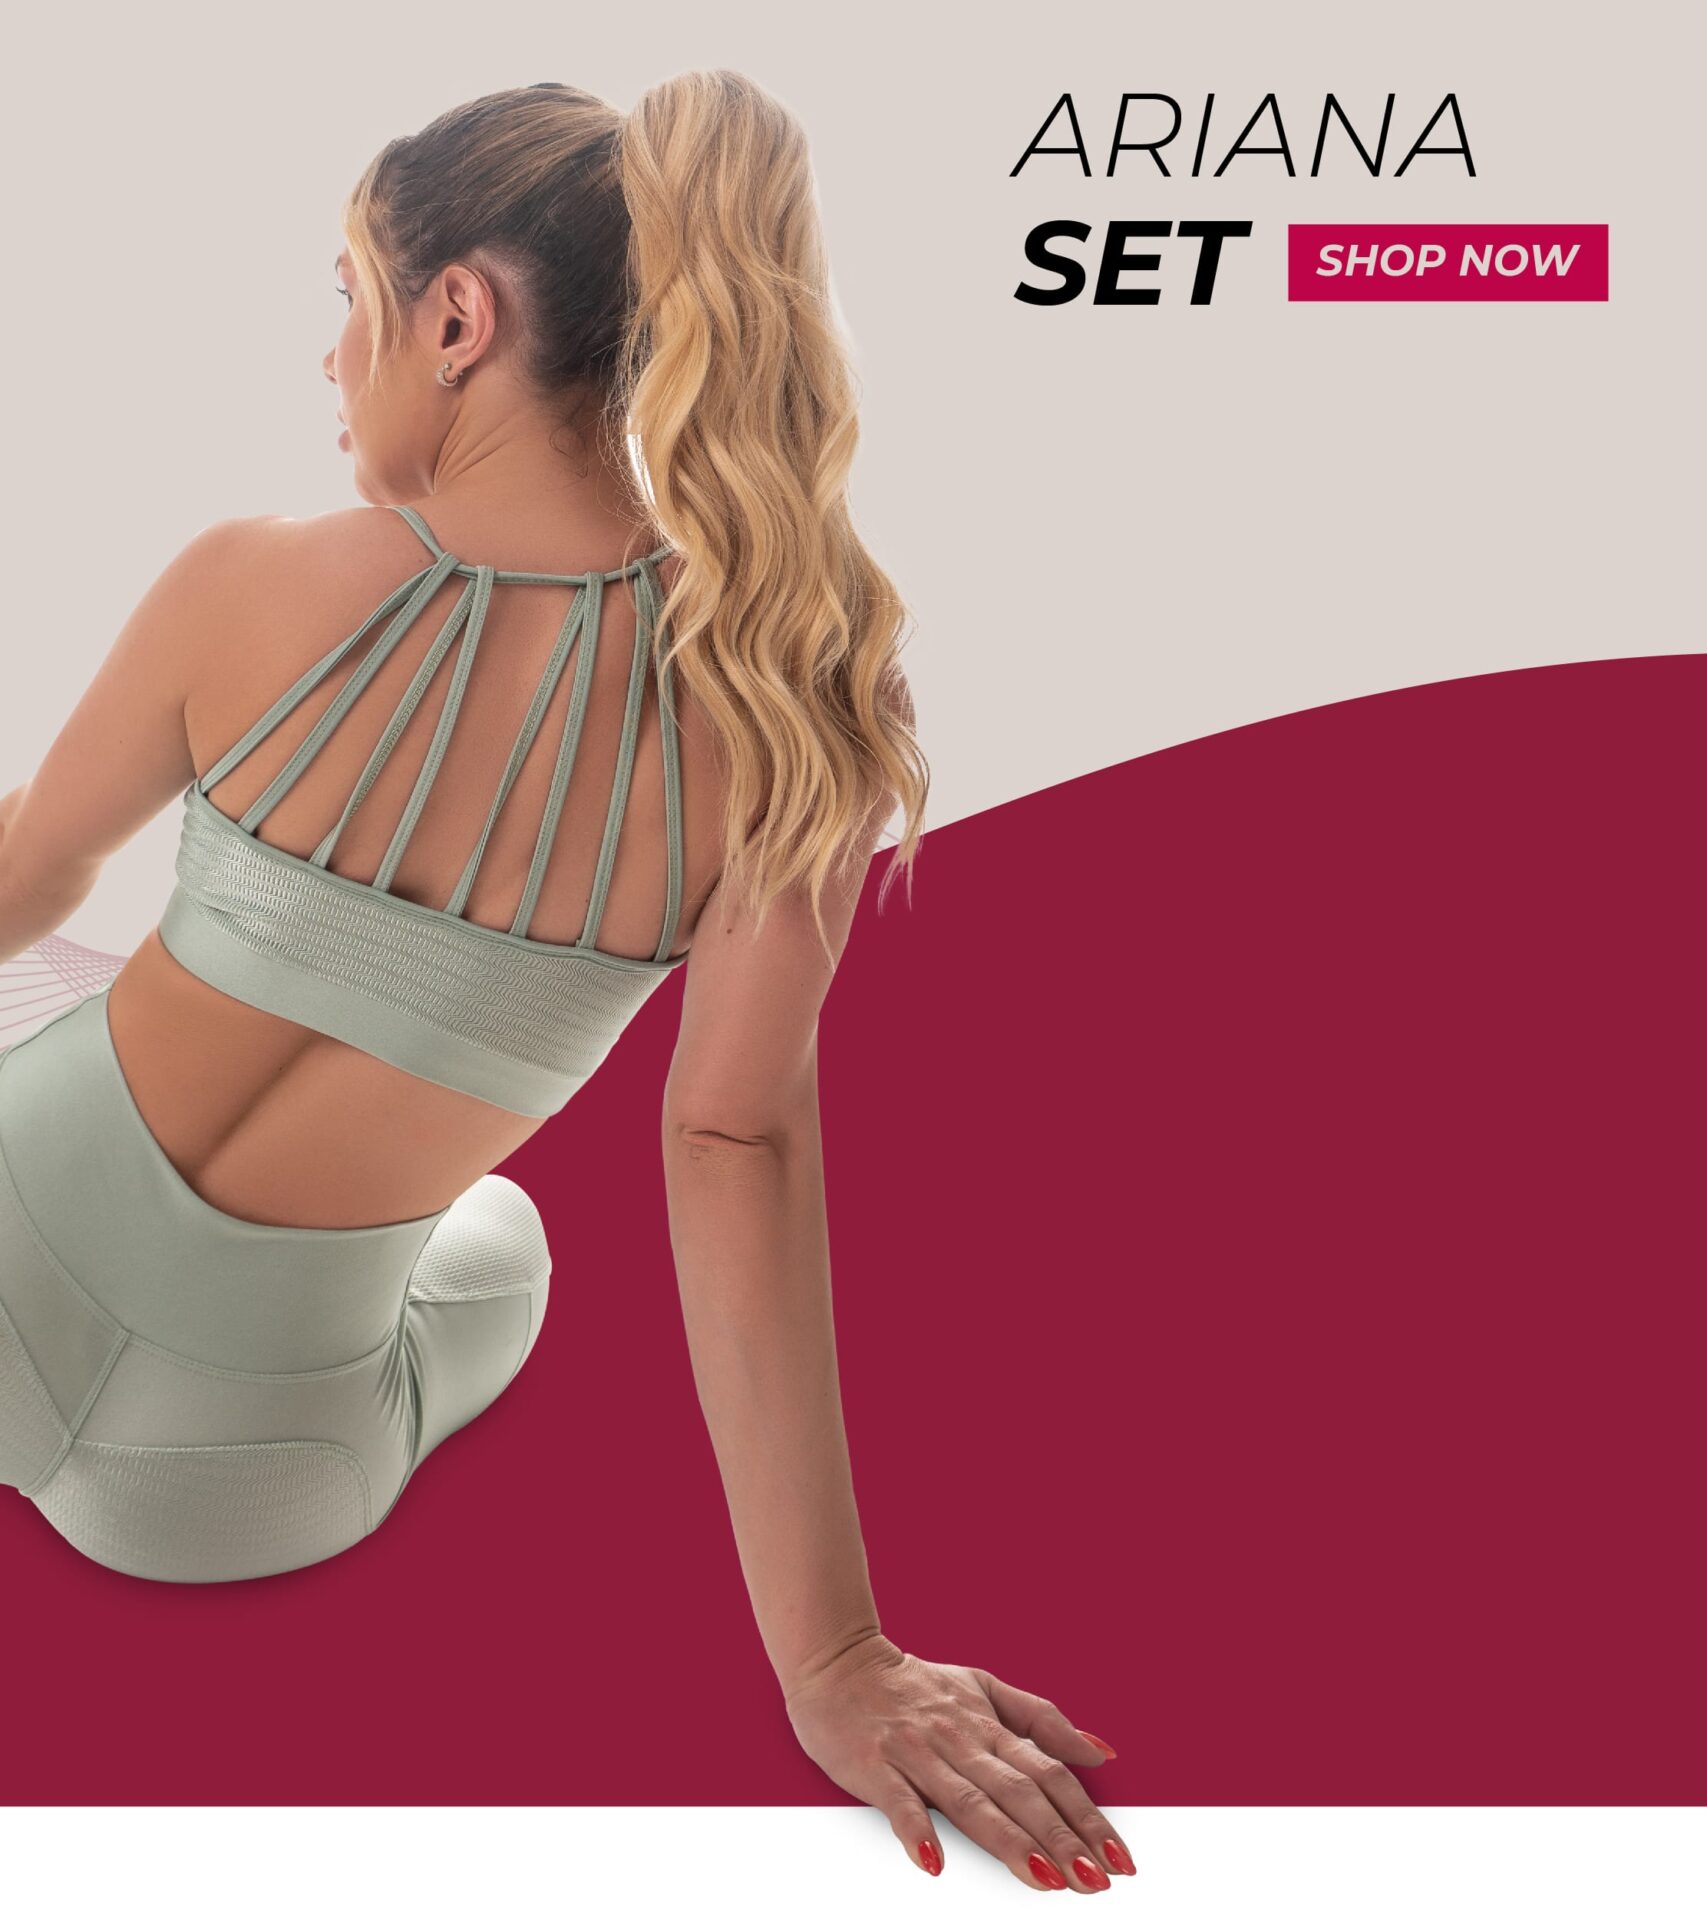 Fitnessee Banners ariana set Mobile